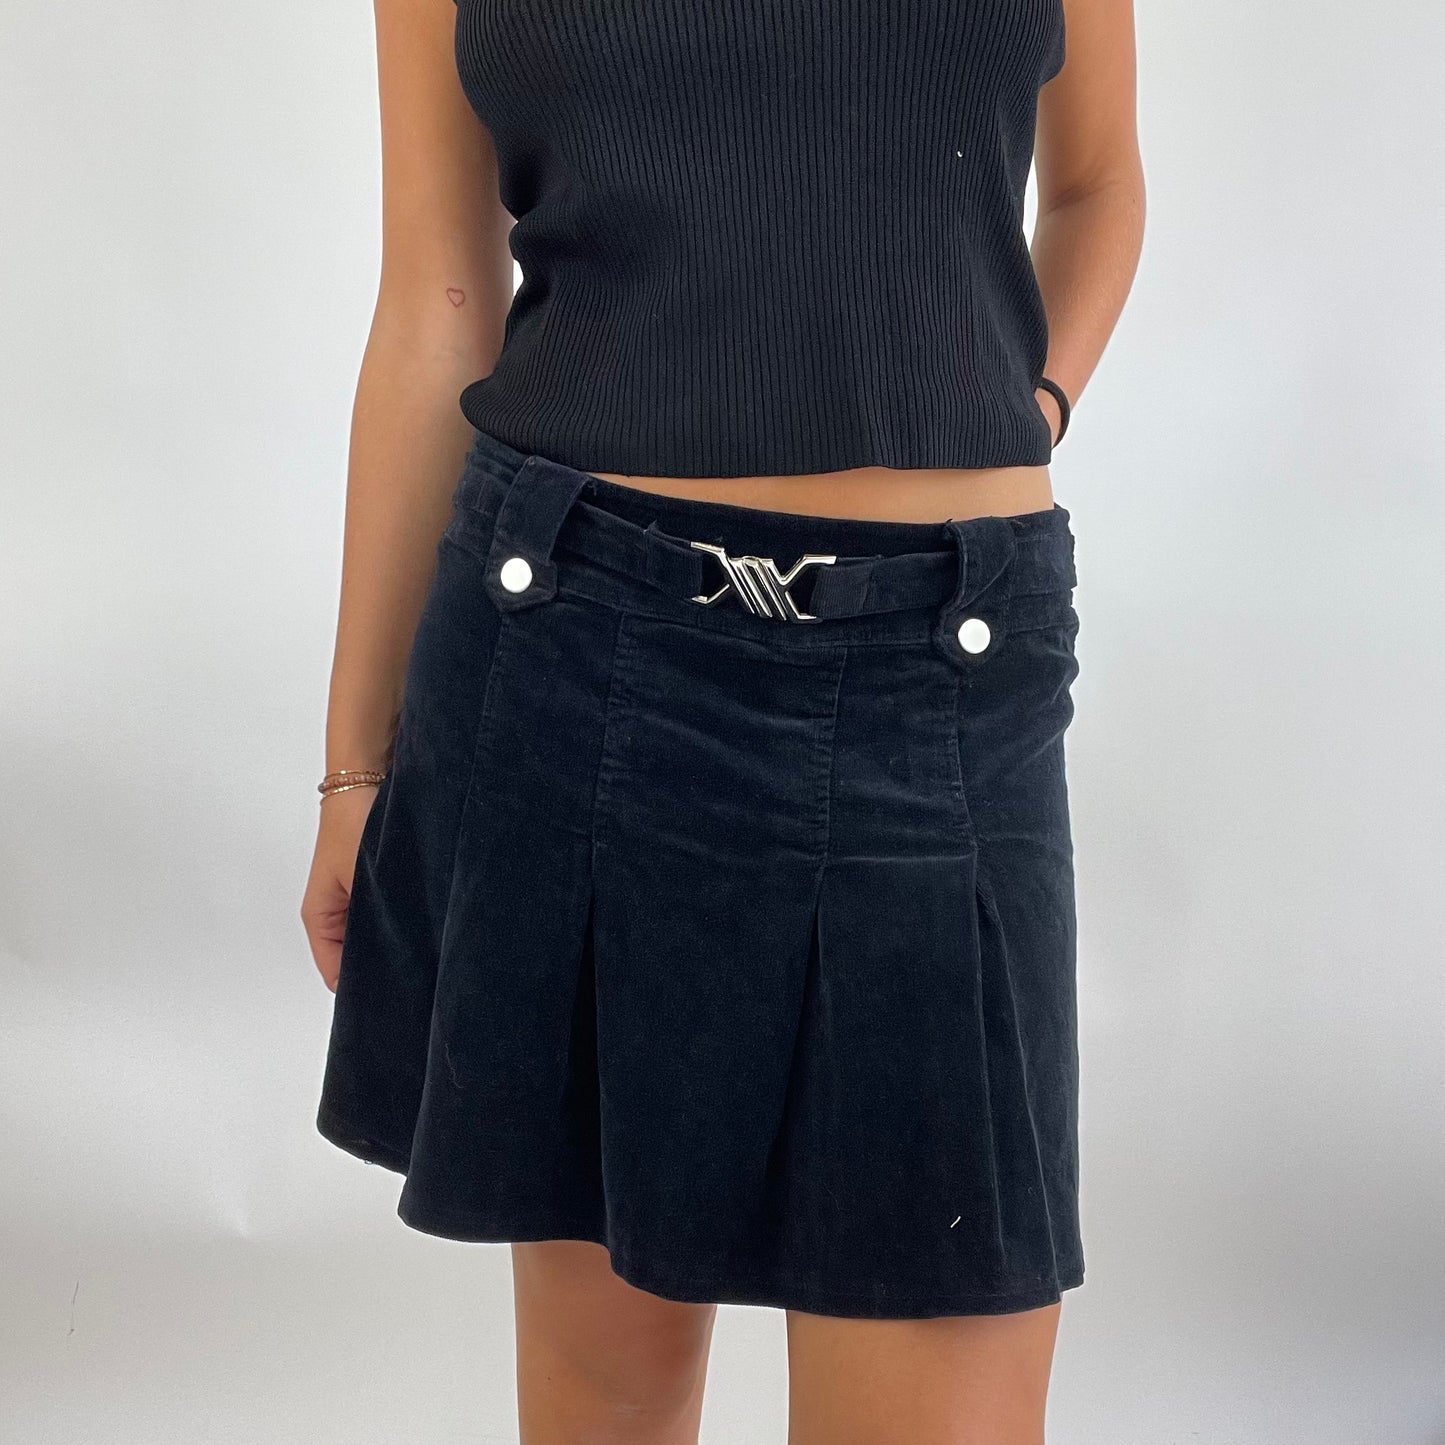 MODEL OFF DUTY DROP | small black corduroy skirt with buckle